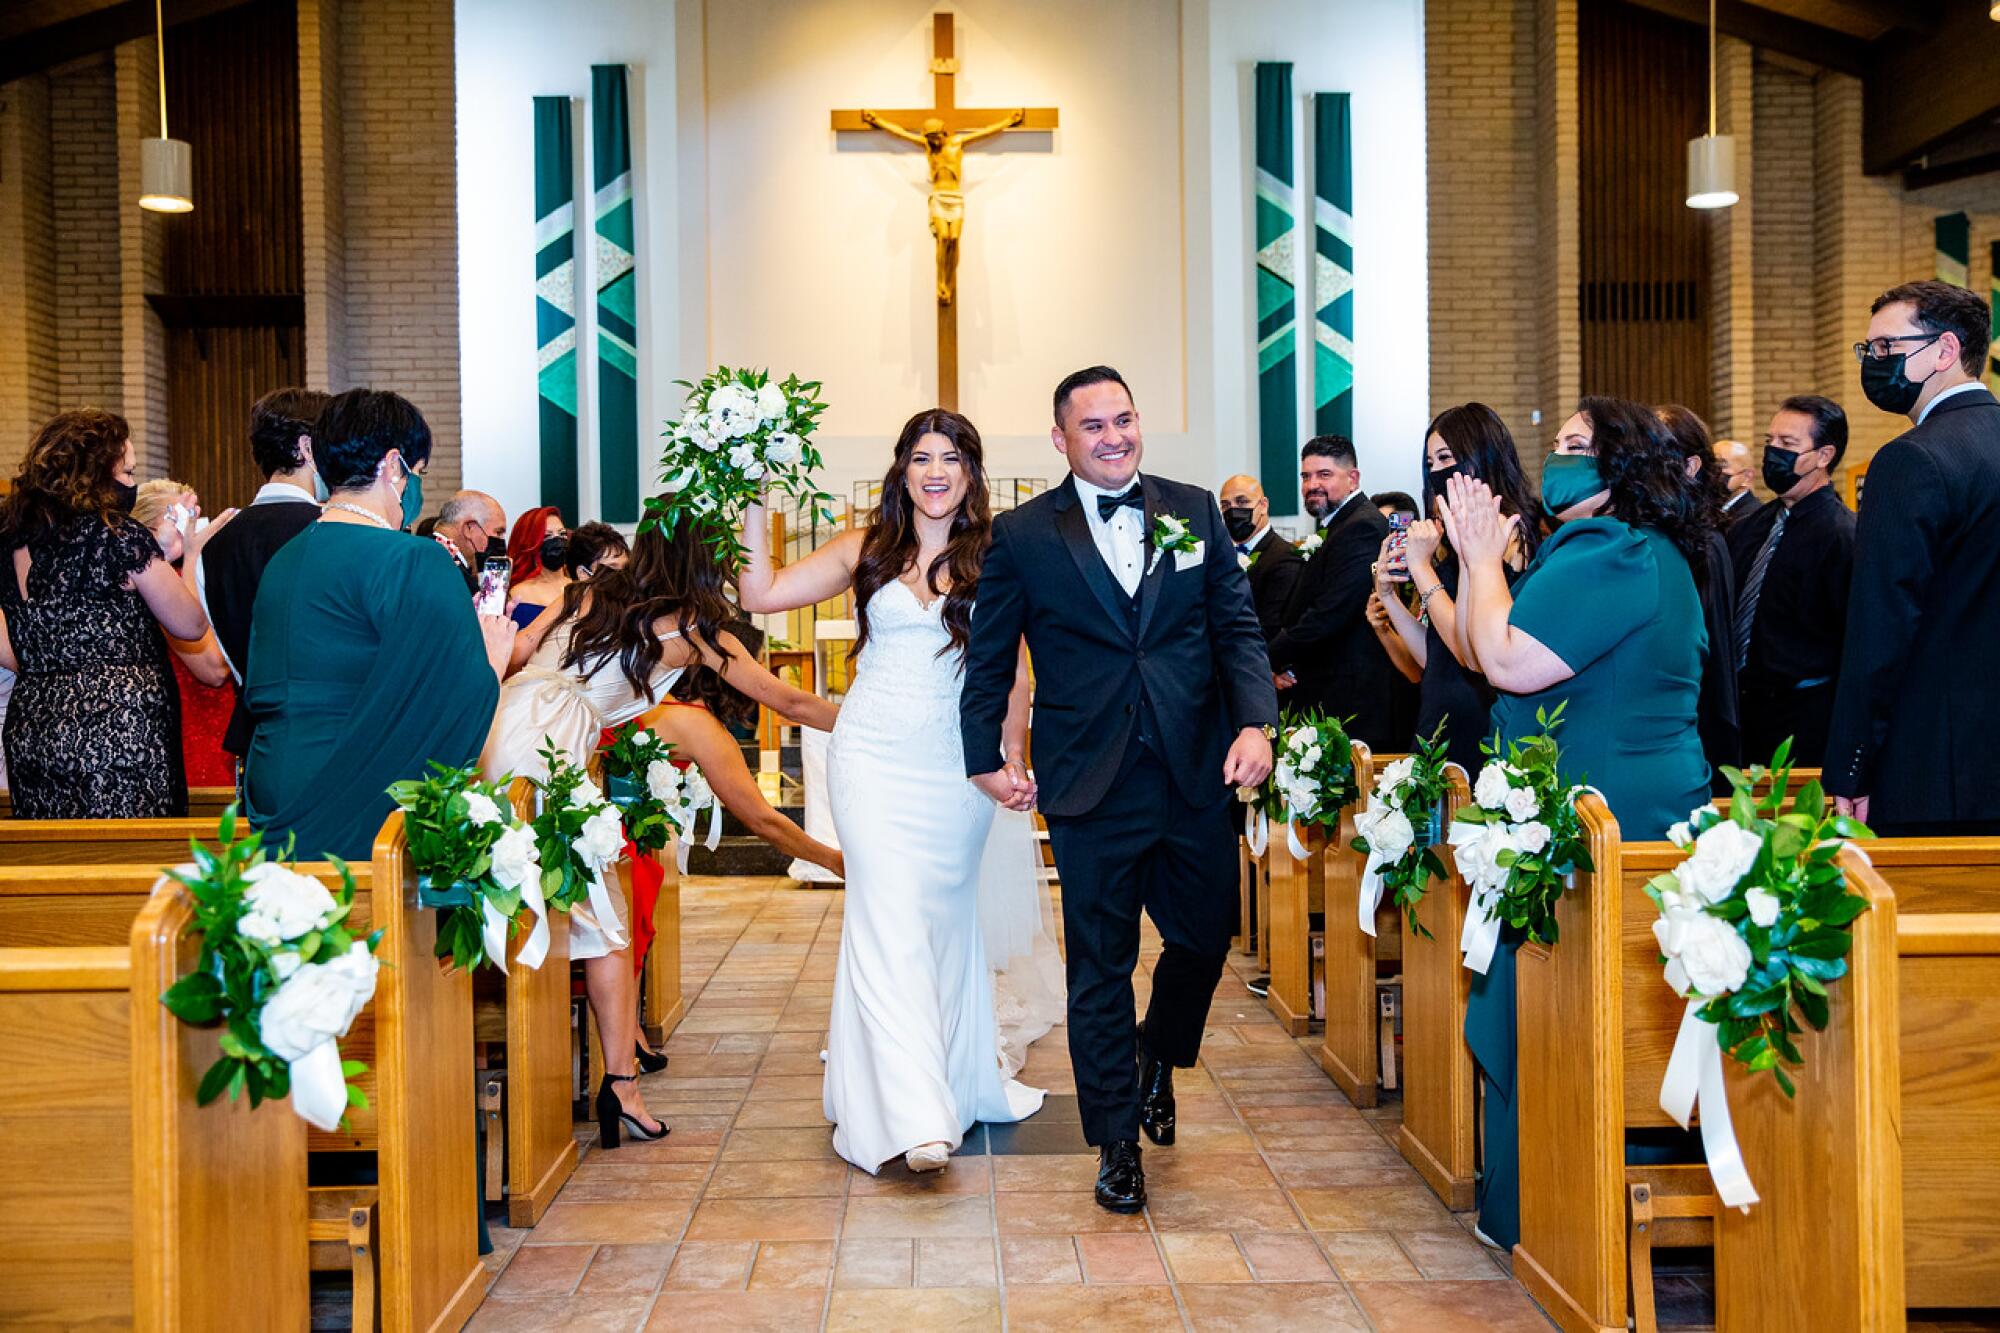 A bride and groom walk down the aisle of a church as people in the pews applaud them.